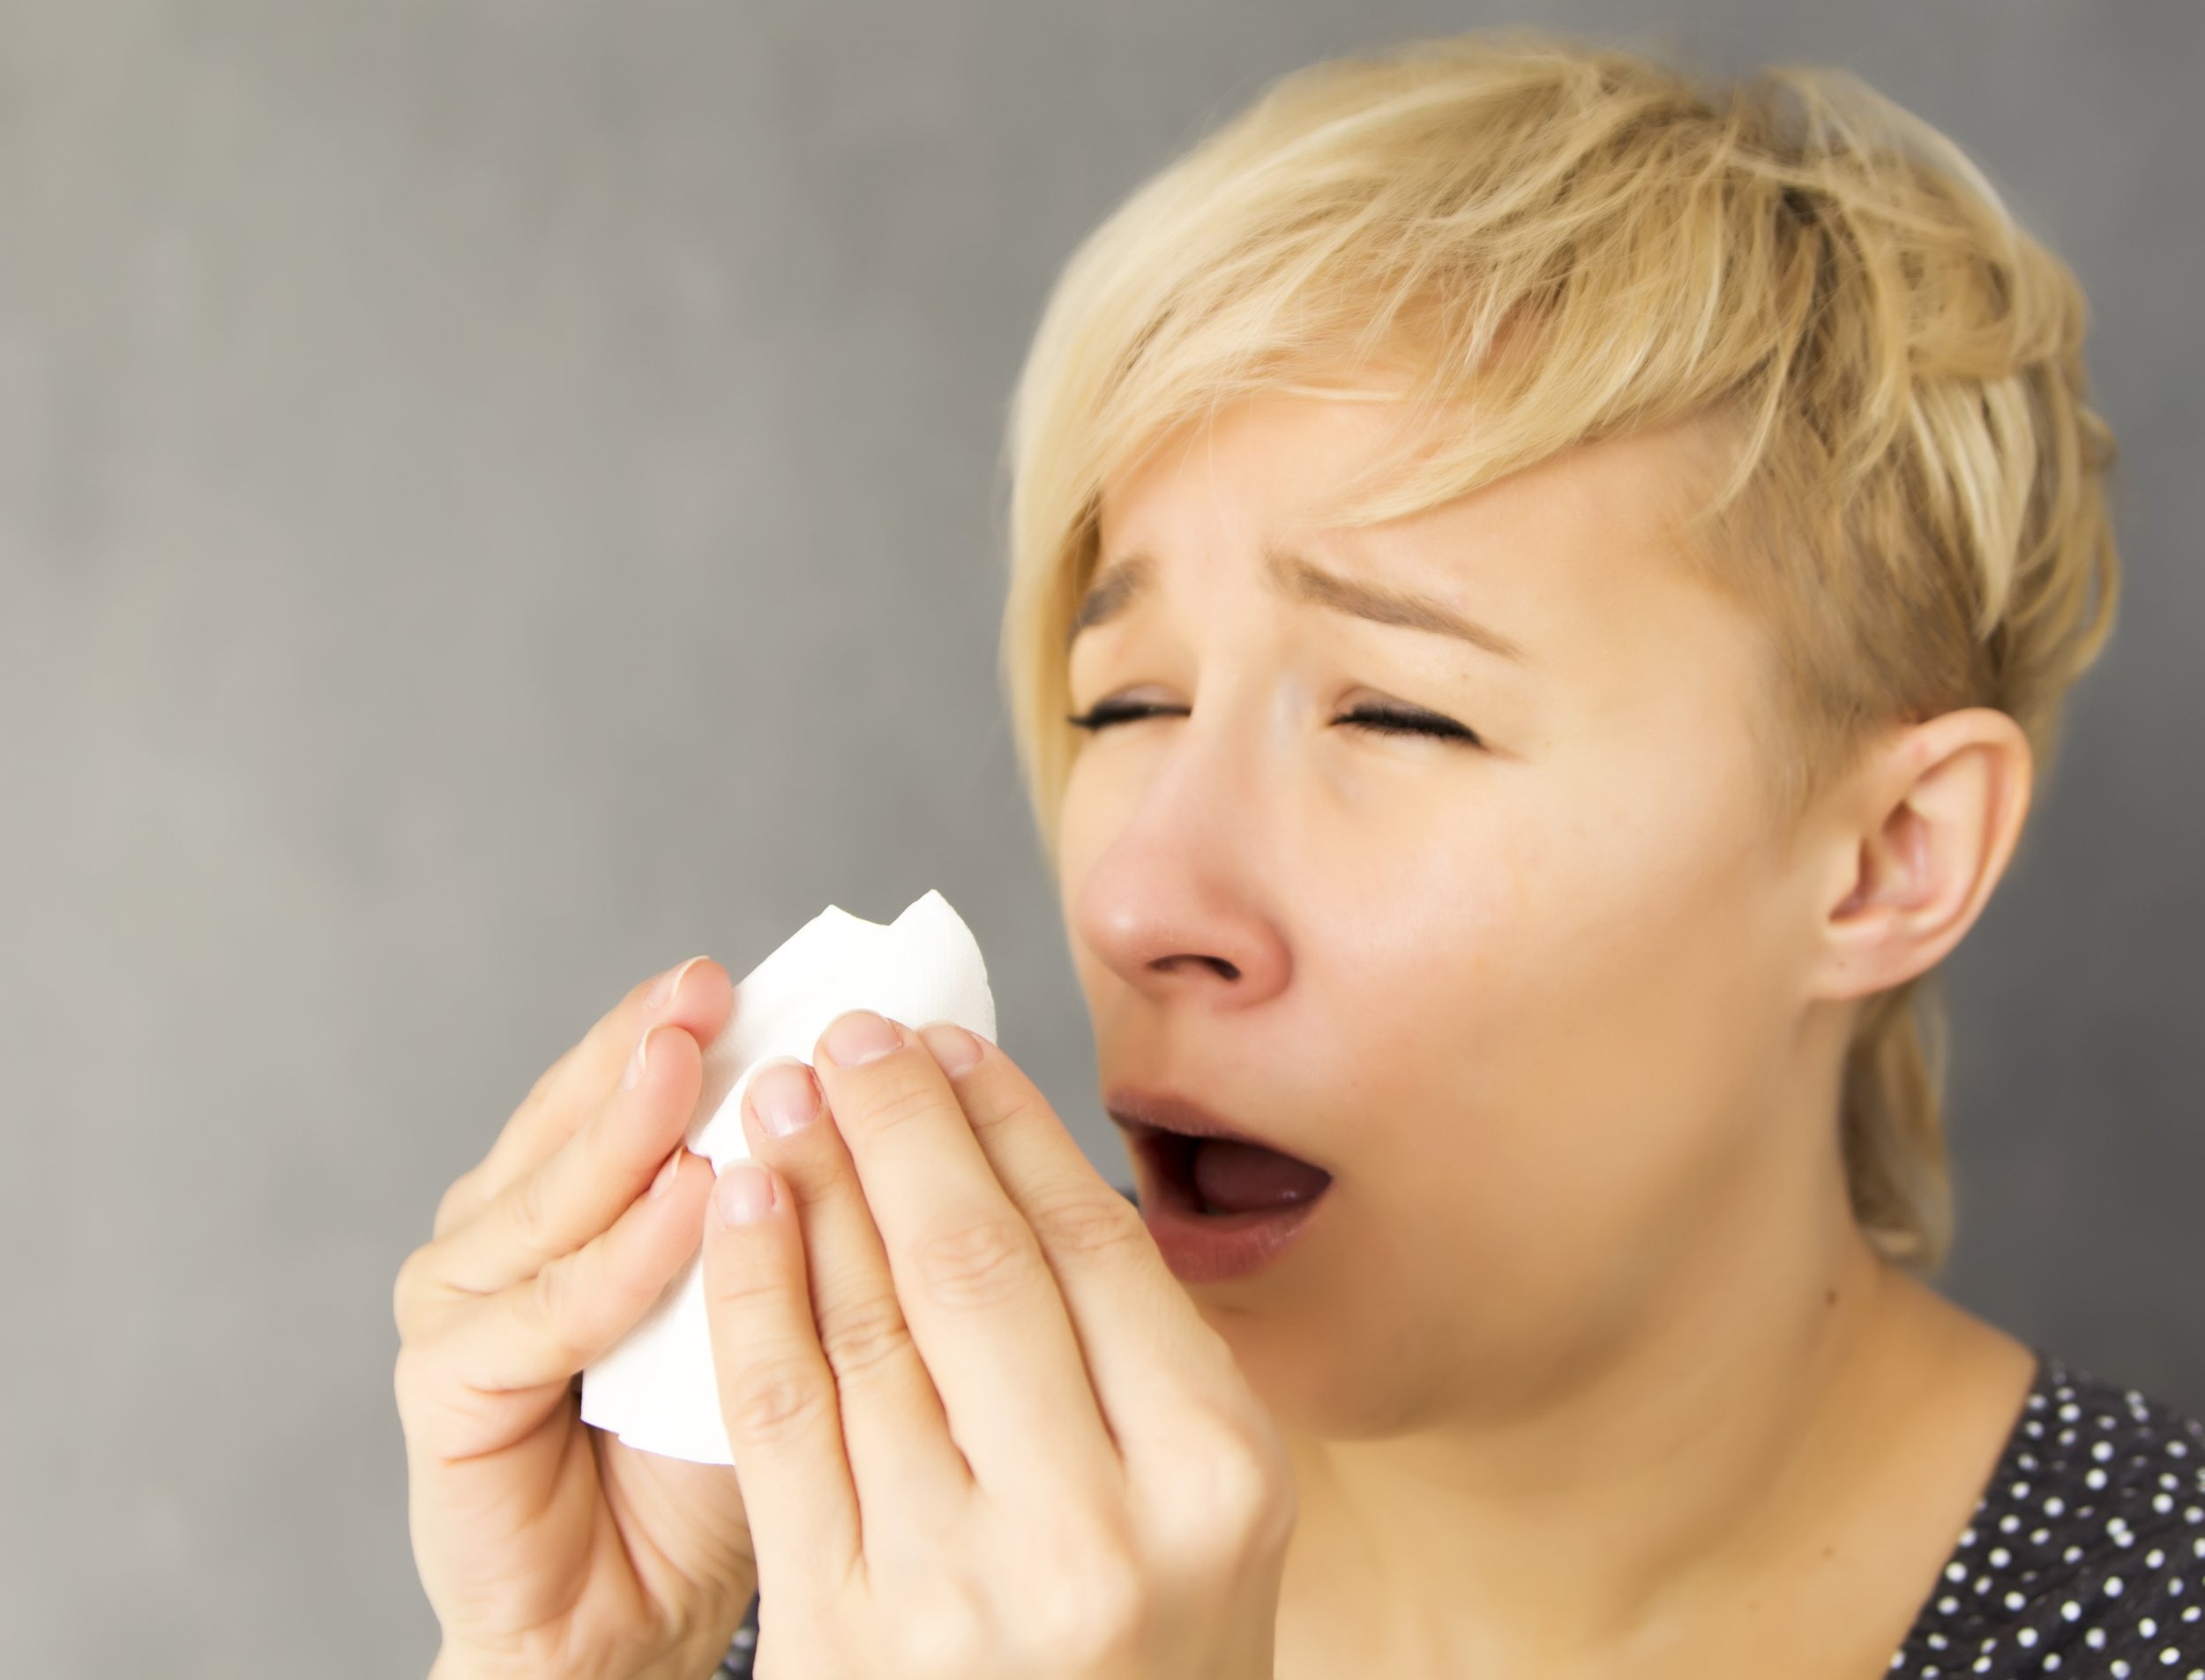 Don’t Stifle Your Sneeze, Let It Go: Here’s Why Holding In Can Be Dangerous